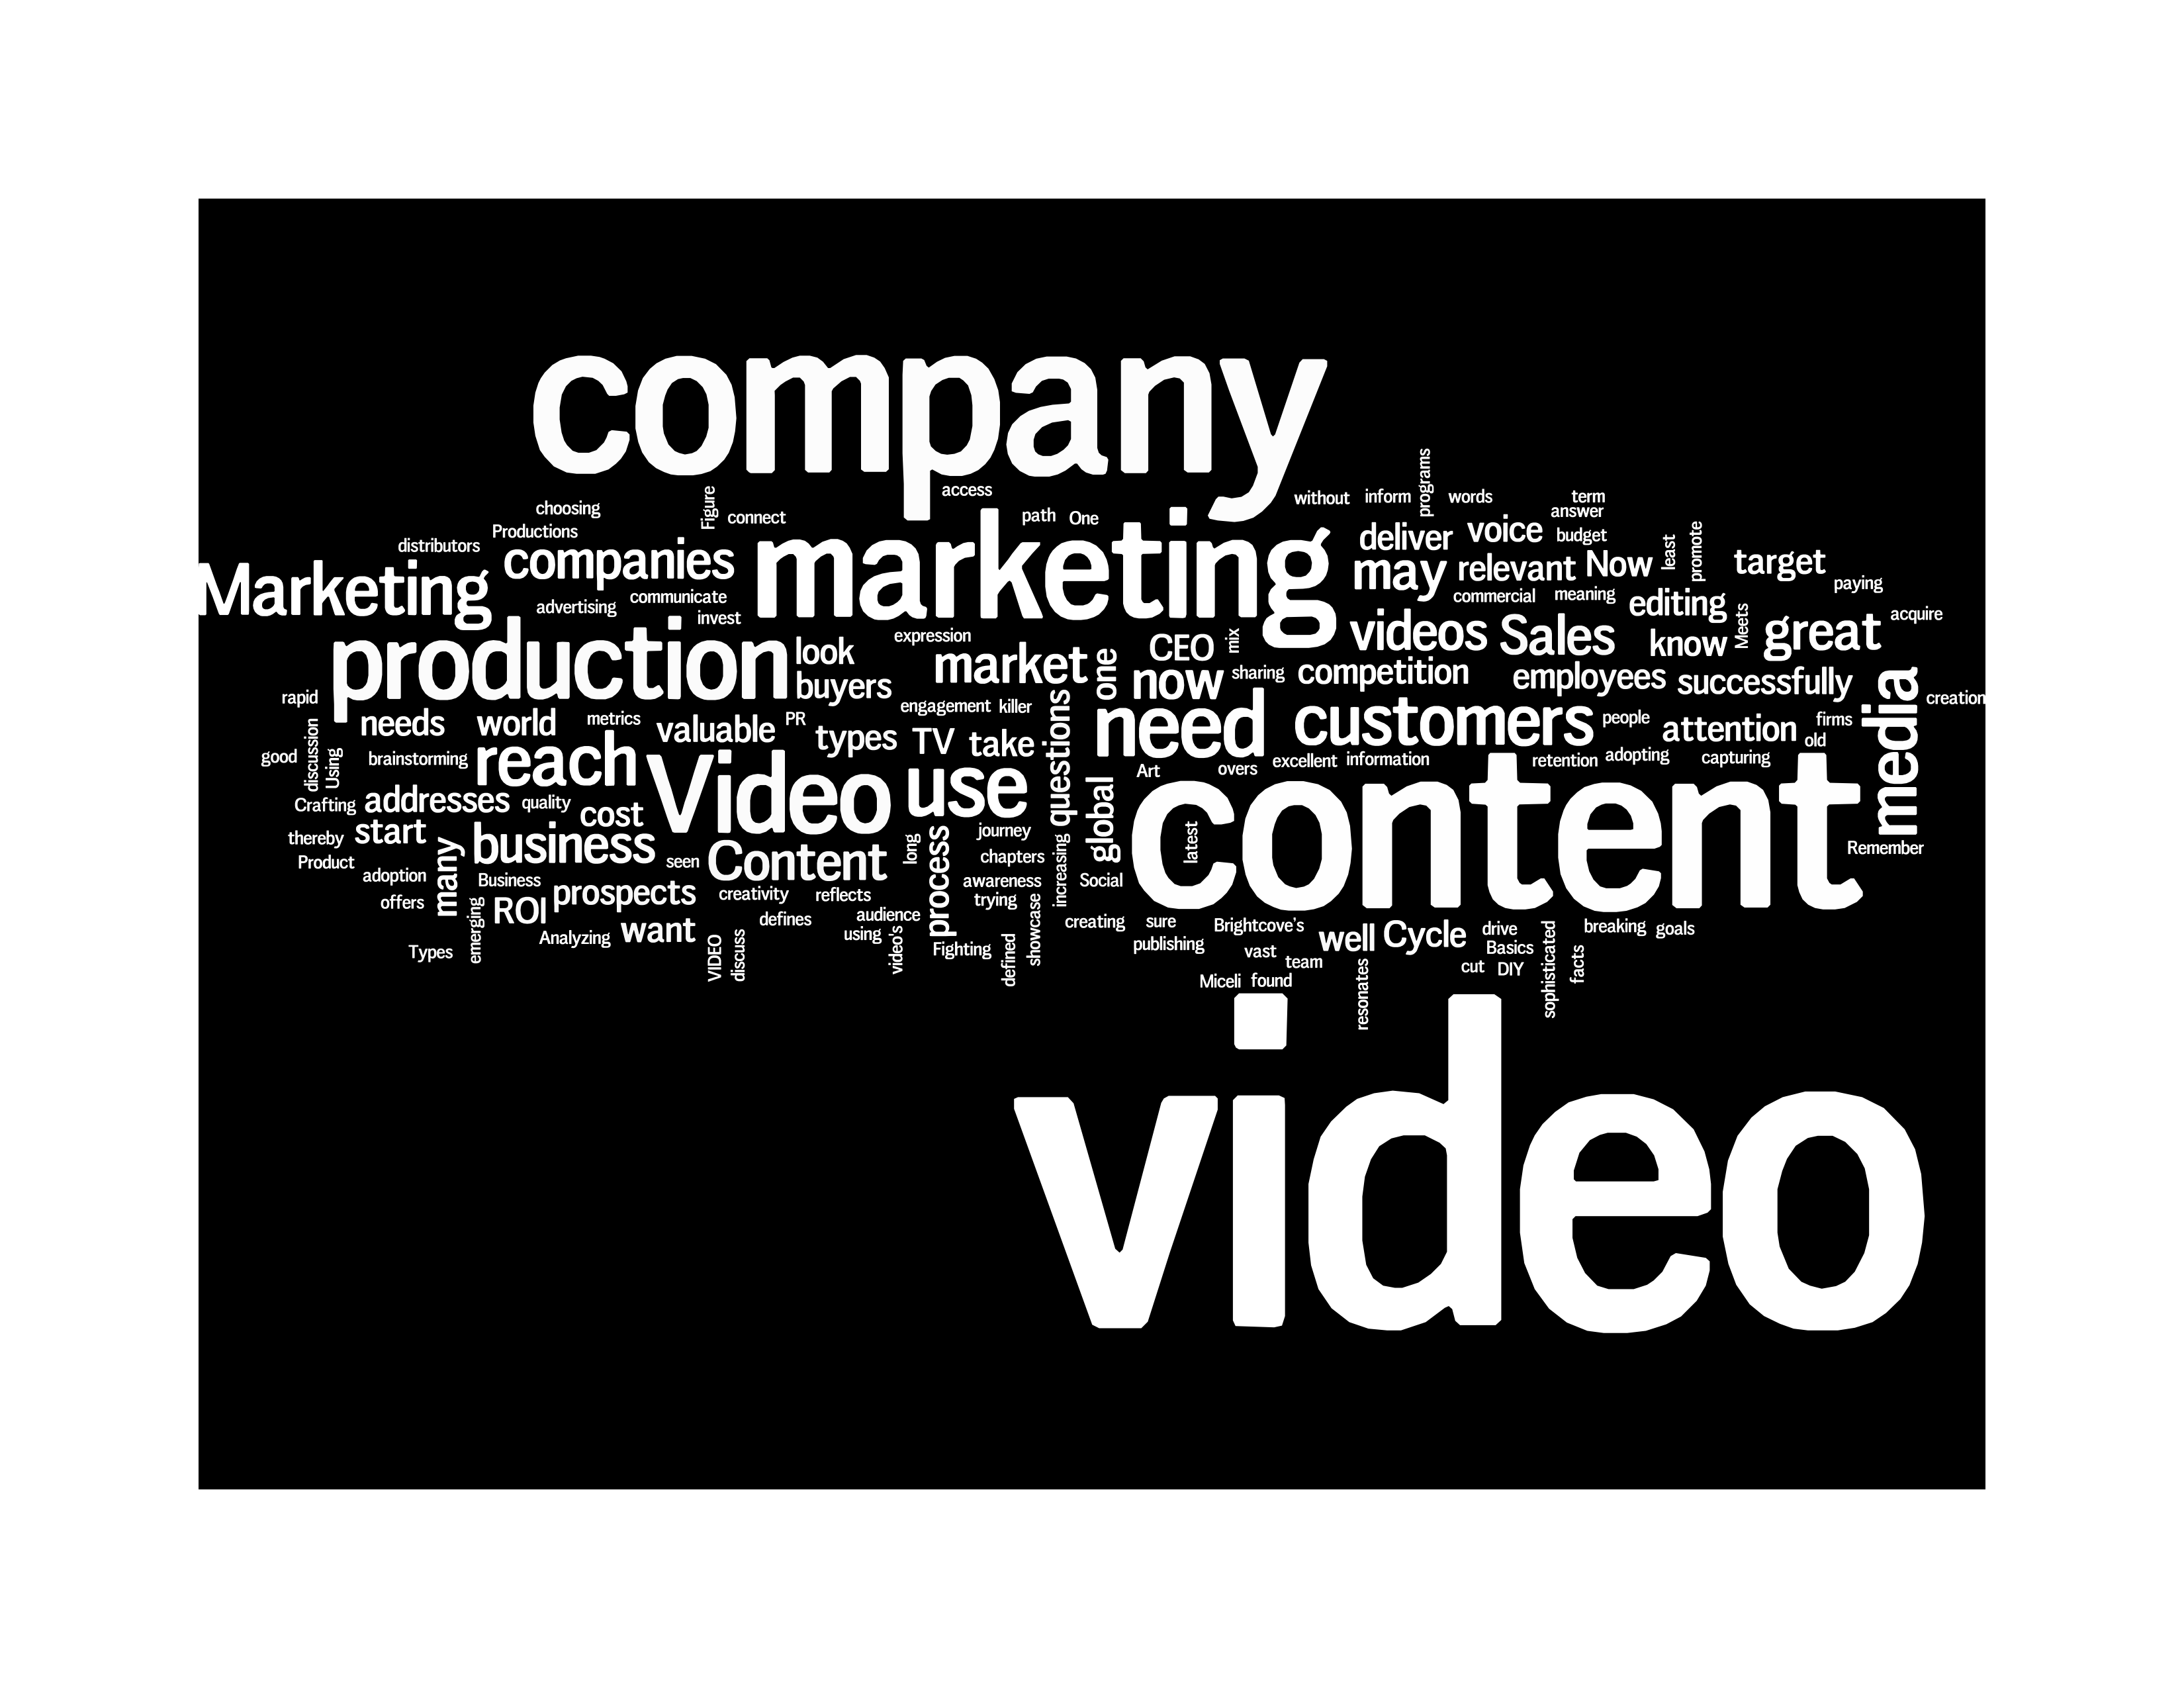 Wordle cloud comprosed of words dealing with Video Production and Content Creation by Miceli Productions